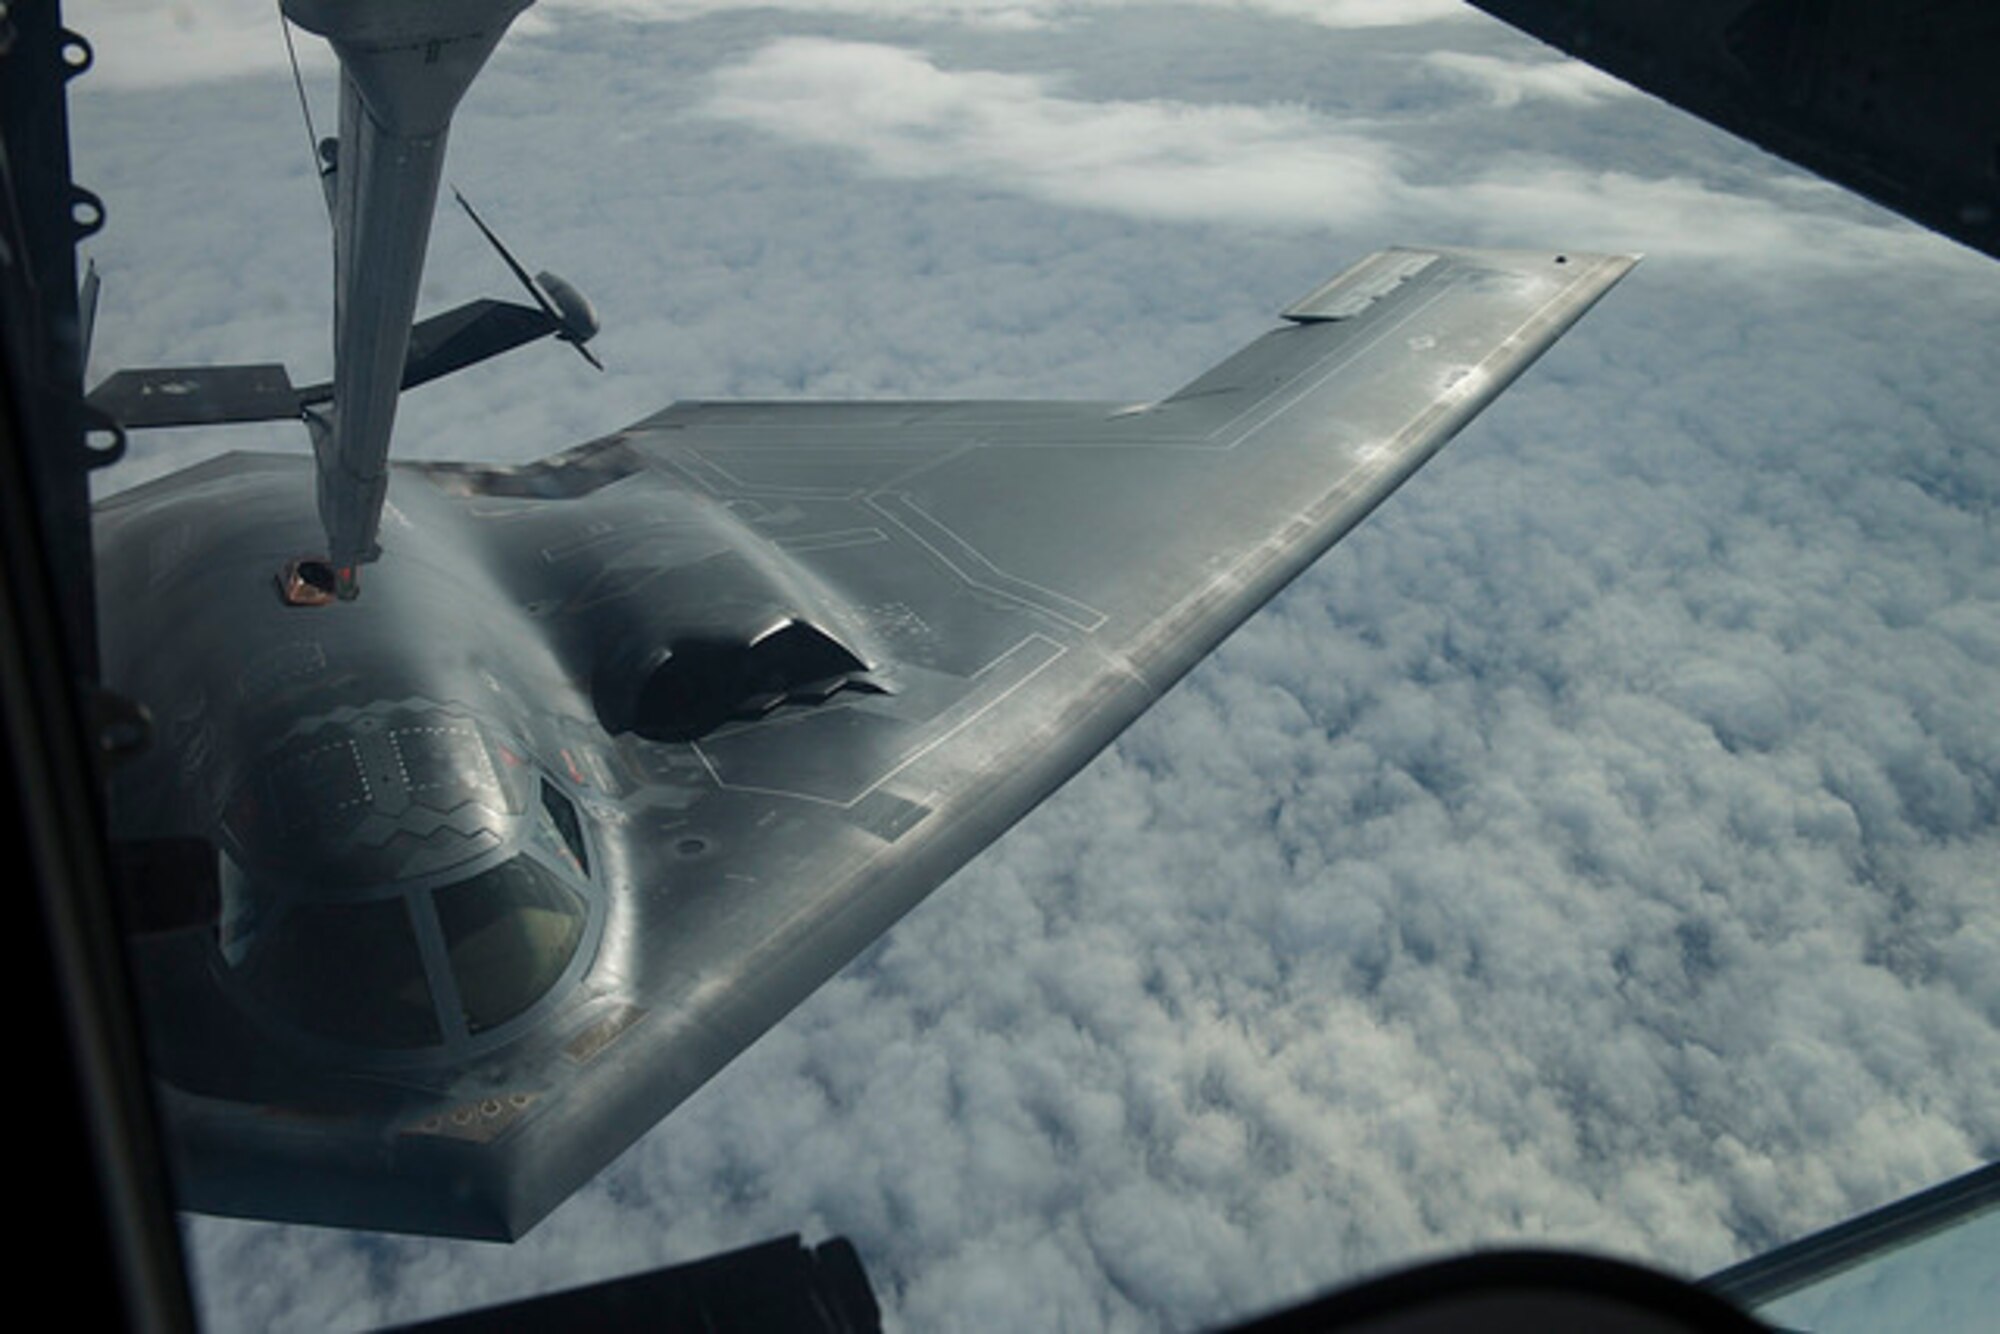 A B-2 Spirit from Whiteman Air Force Base, Mo. receives fuel from a KC-10 Extender from Joint Base McGuire-Dix-Lakehurst, N.J. during a Mobility Exercise held by JB MDL. The Joint Base holds an annual MOBEX in Gulfport, Miss. to practice deploying and operating in a deployed environment.(U.S. Air Force photo by Senior Airman Joshua King)